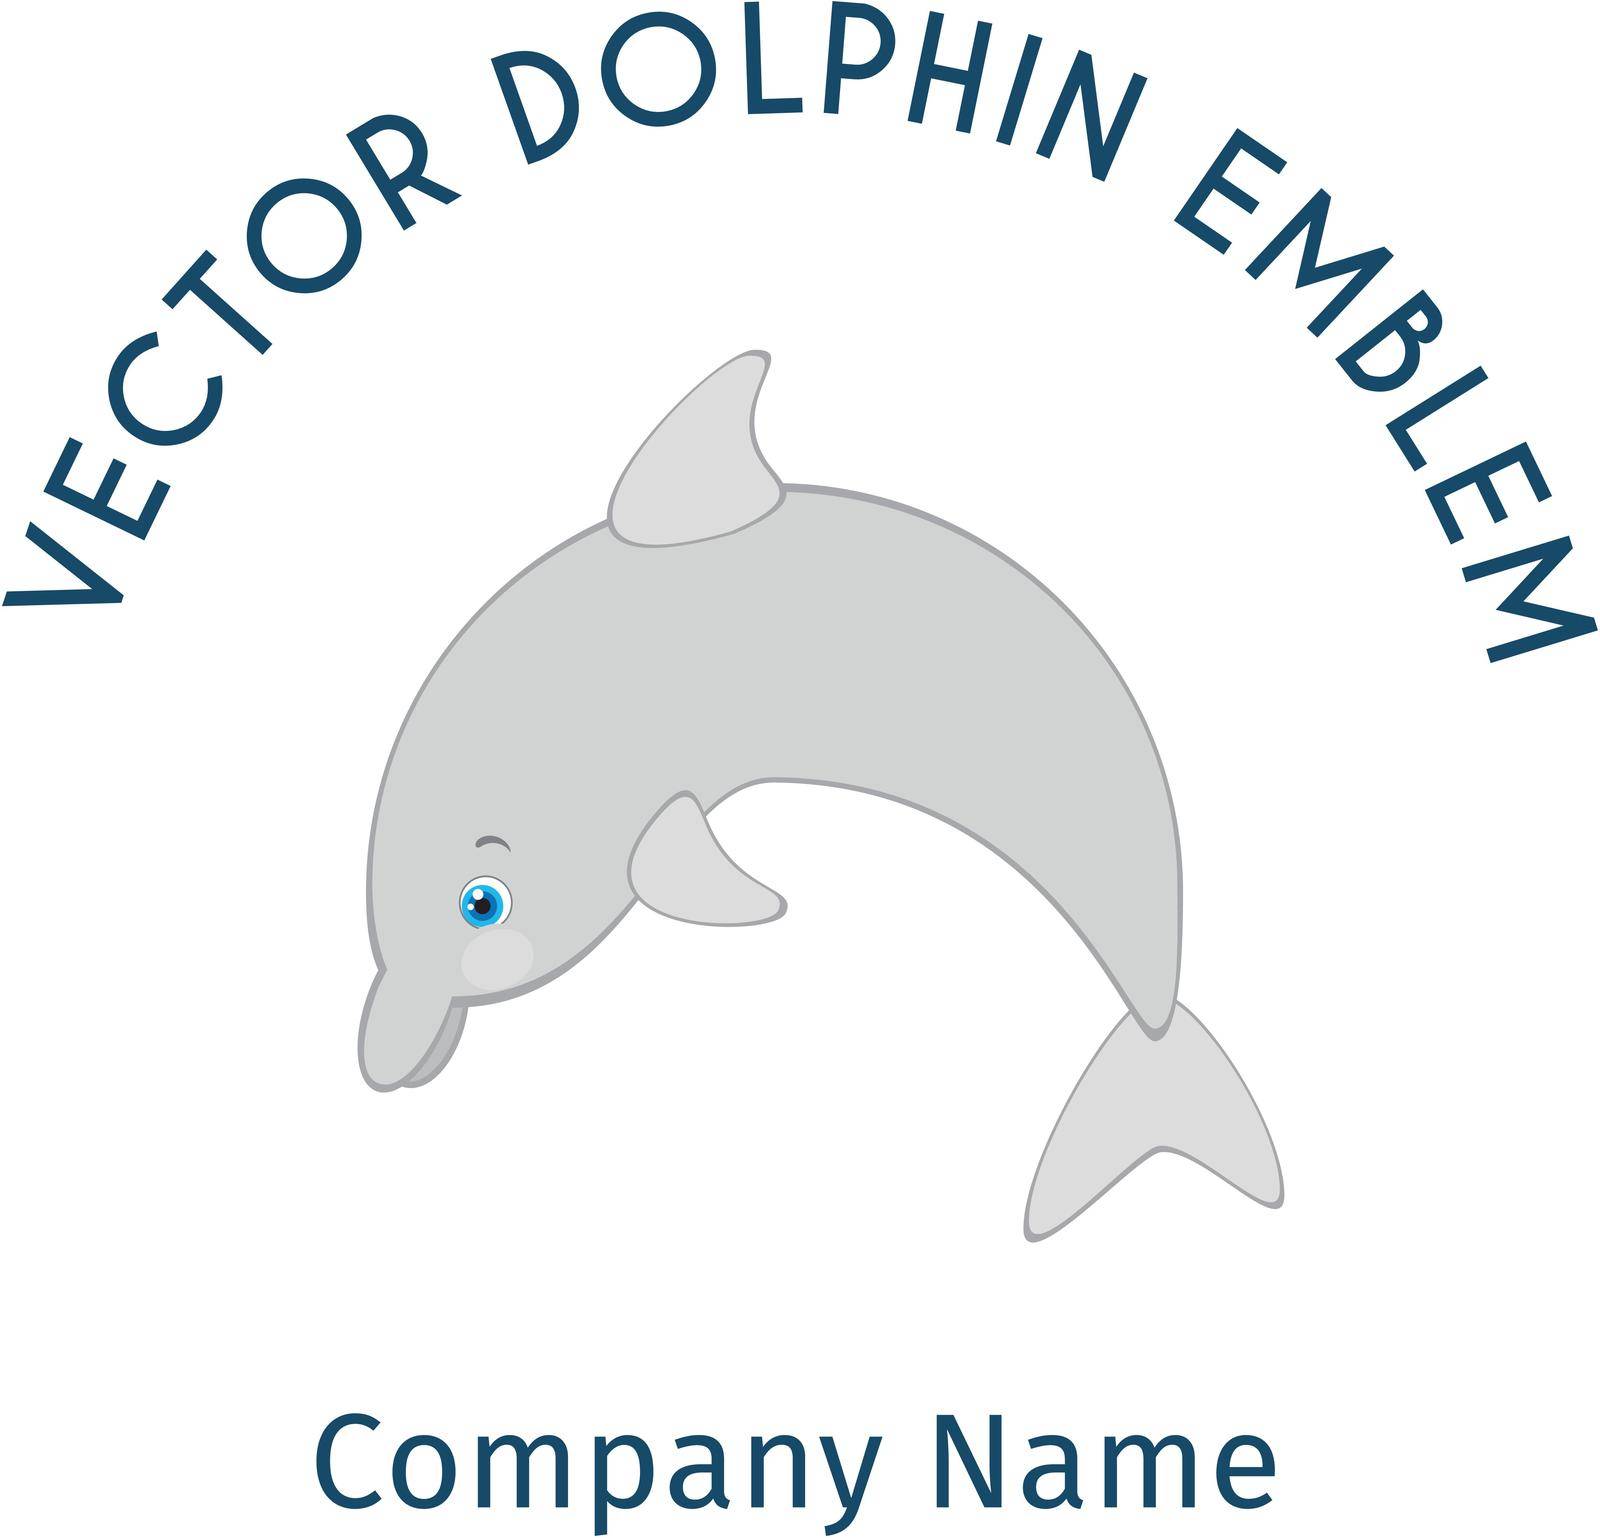 Jumping dolphin logo template. Vector cartoon emblem for resorts or hotels by the sea, dolphin show, dolphinarium